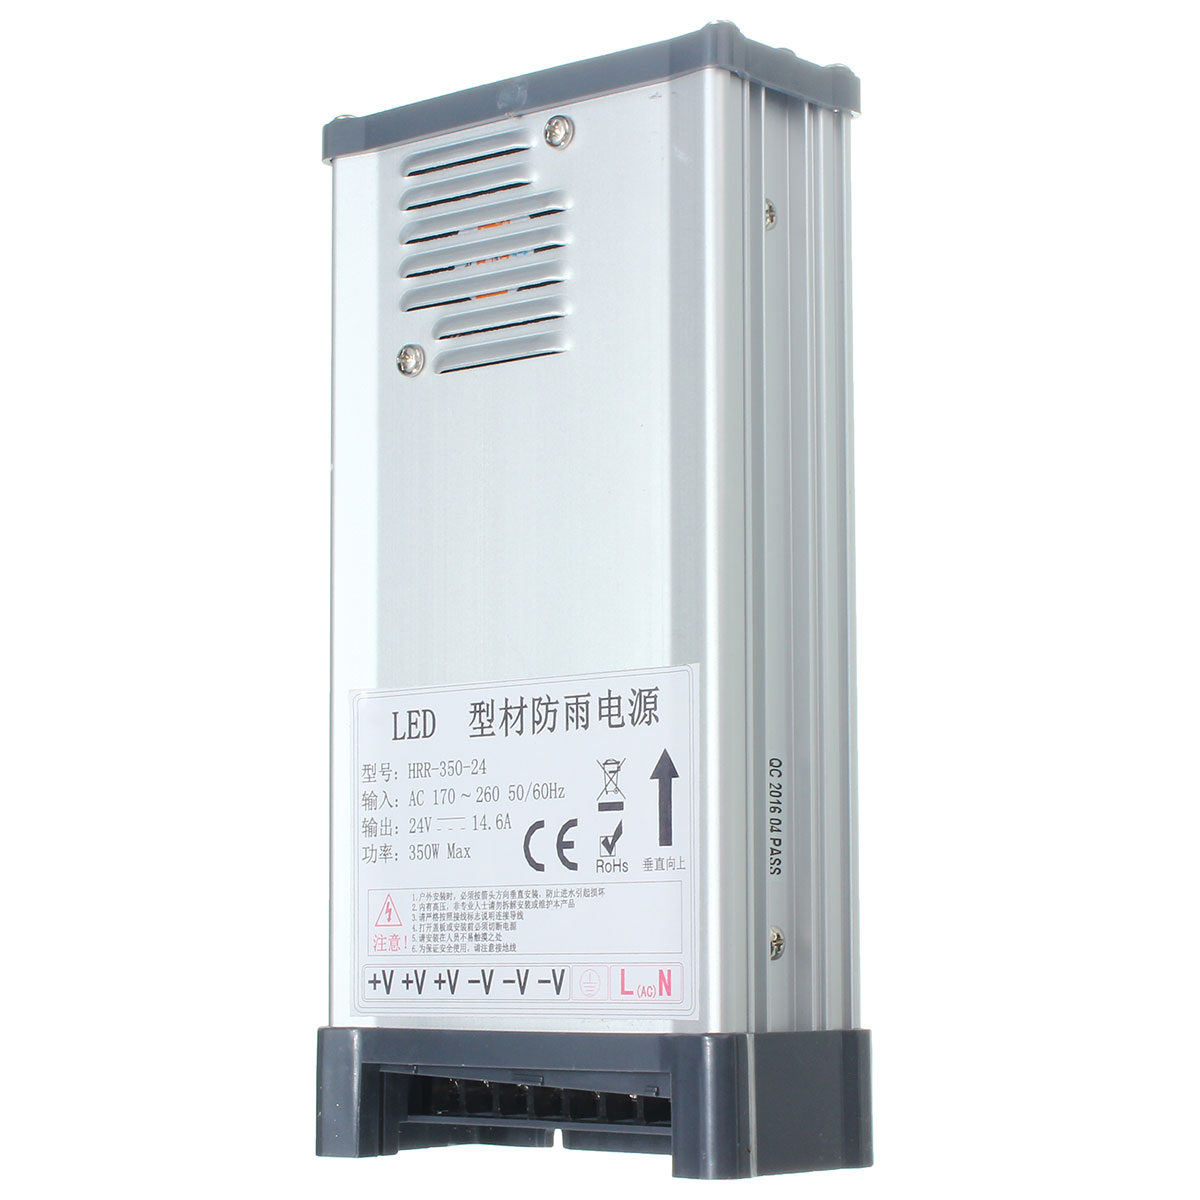 IP65-AC-170V-264V-To-DC-24V-350W-Switching-Power-Supply-Driver-Adapter-1057696